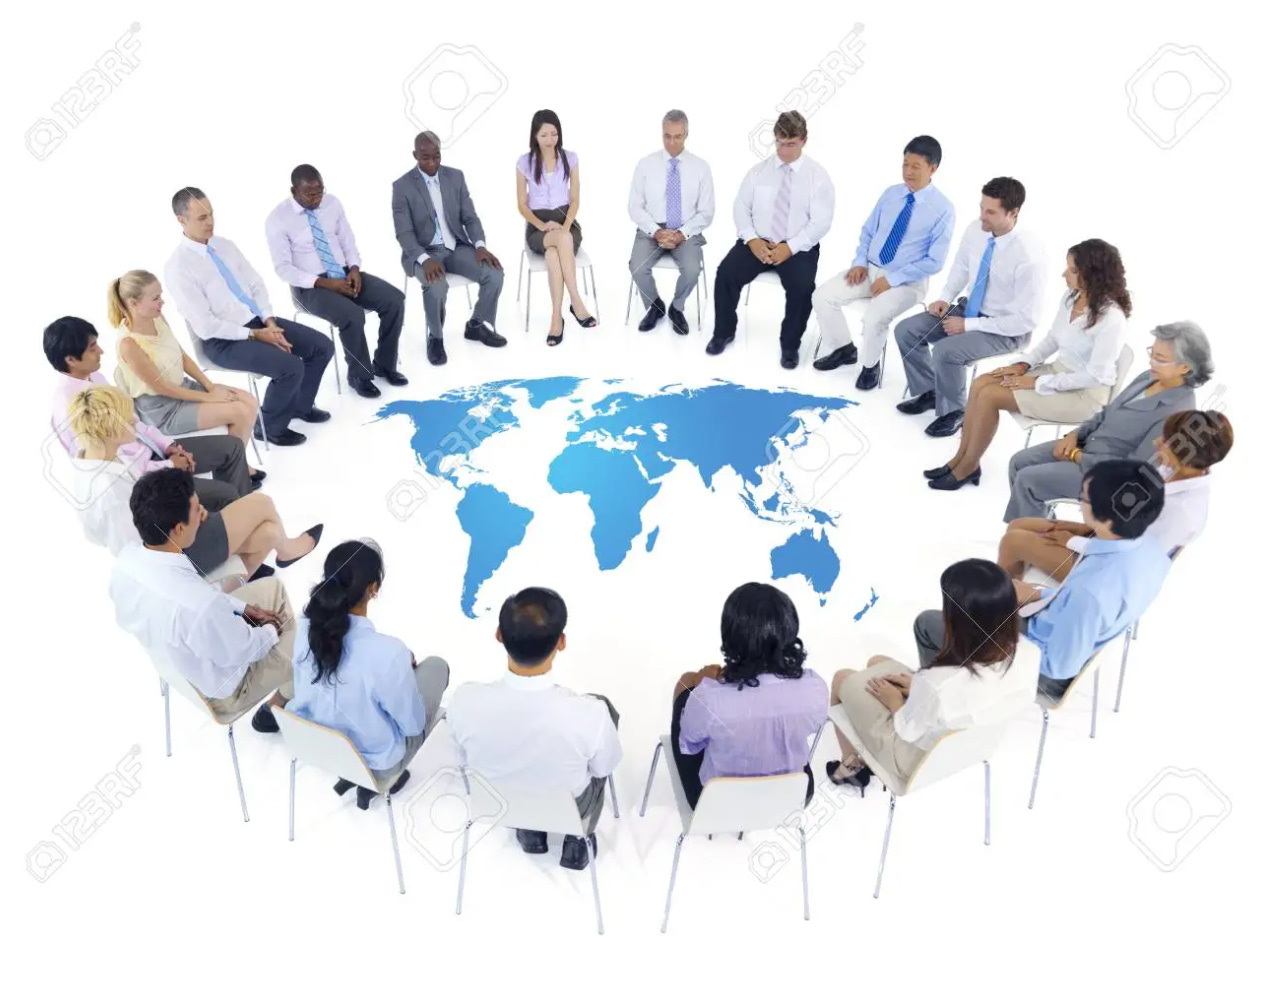 Stock photo of a diverse group of people sitting in a circle around a map of the world. Watermark visible: 123RF